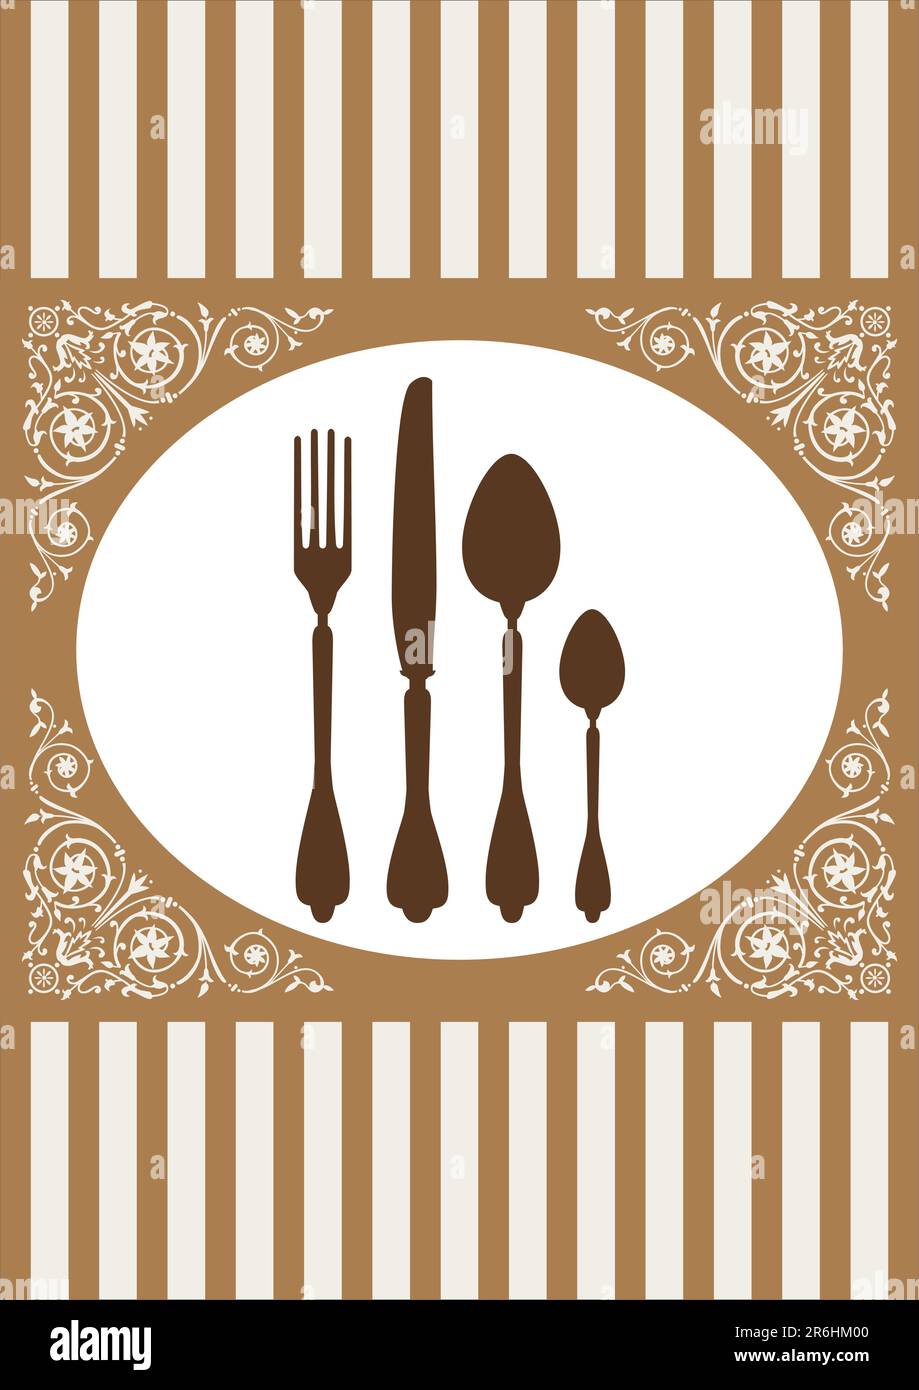 Place setting with fork, spoon and knife and ornaments. Full scalable vector graphic included Eps v8 and 300 dpi JPG. Stock Vector